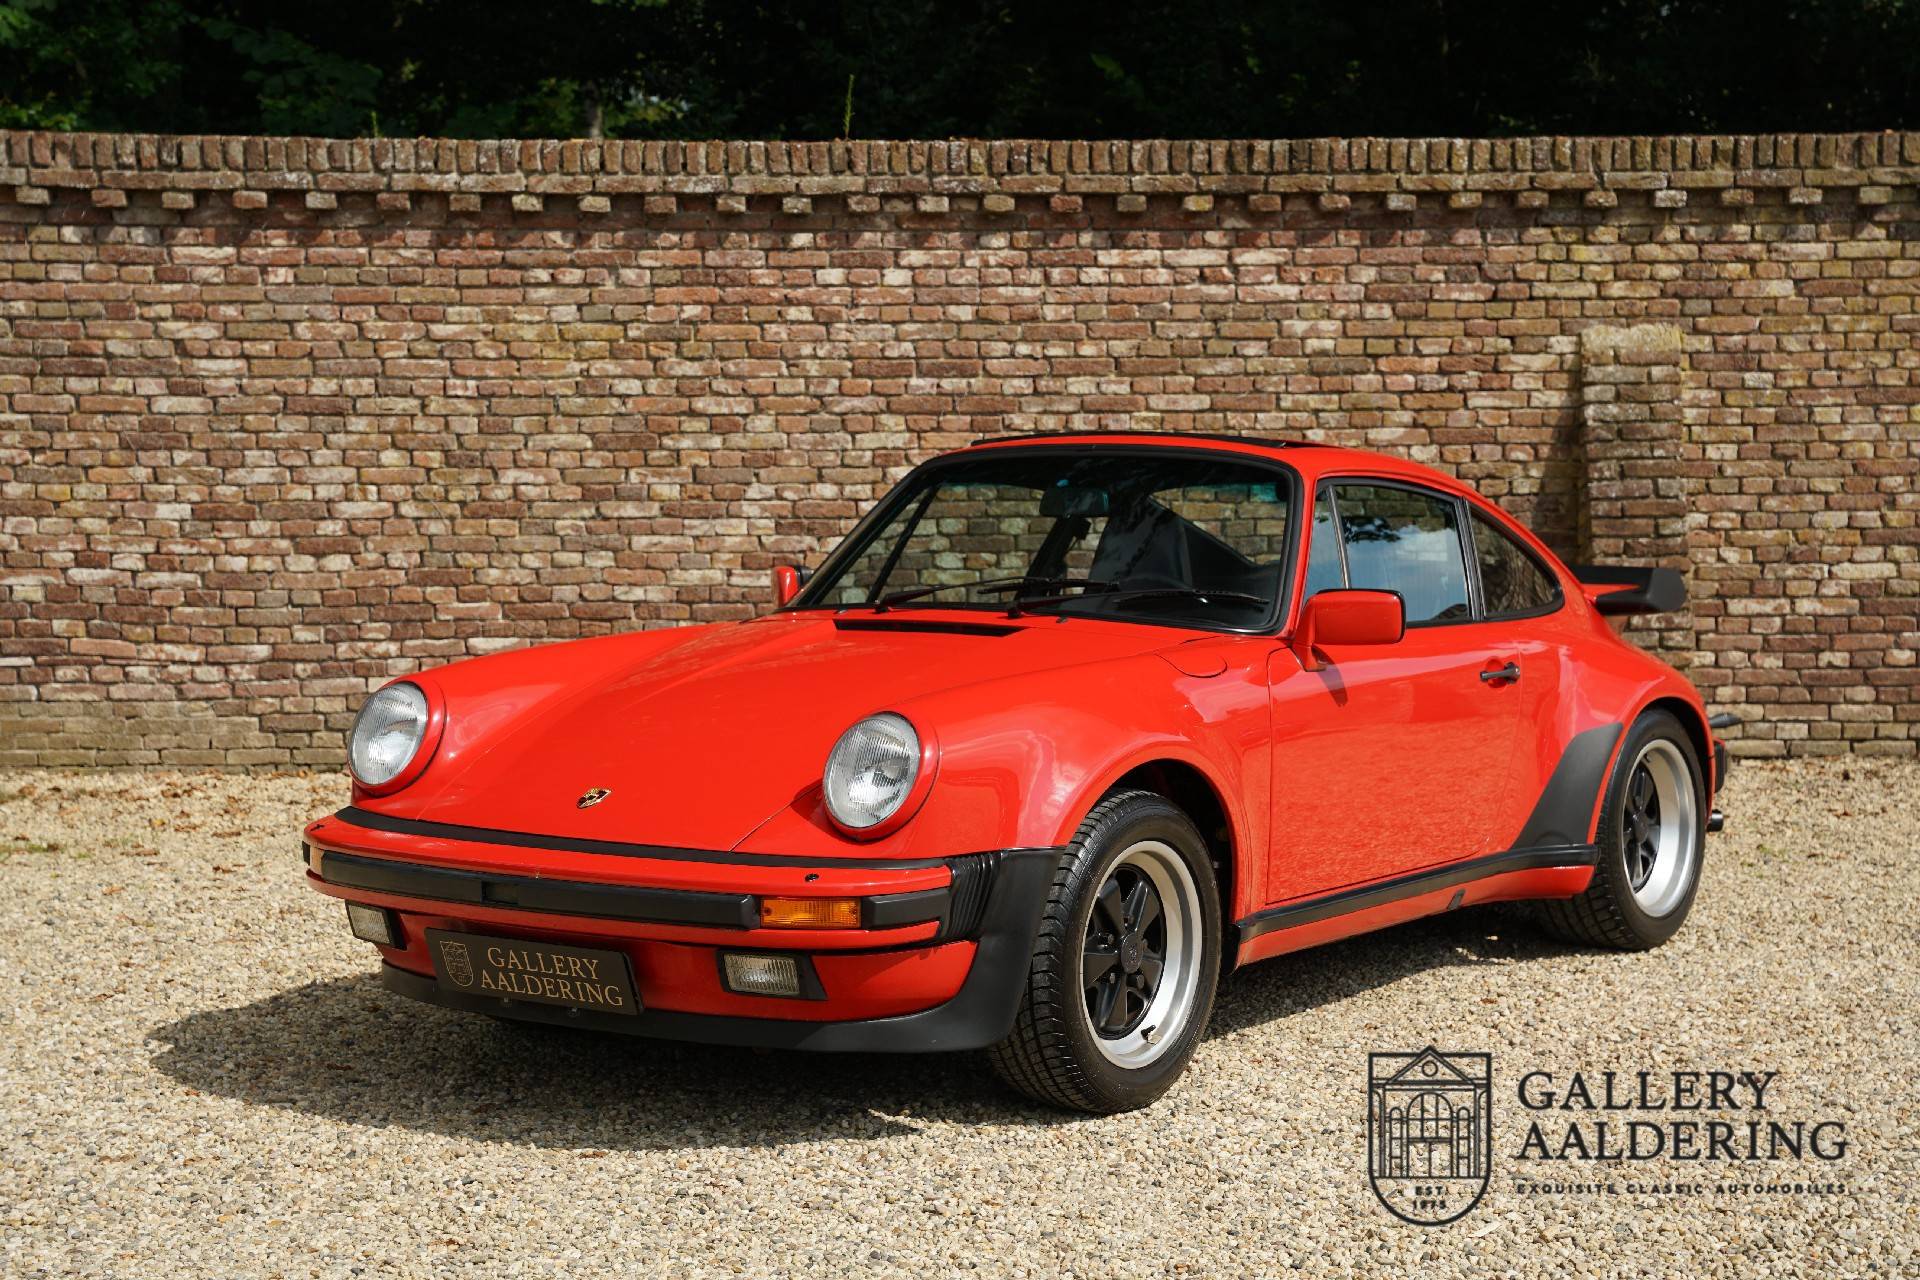 For Sale: Porsche 911 Turbo  (1986) offered for GBP 111,119